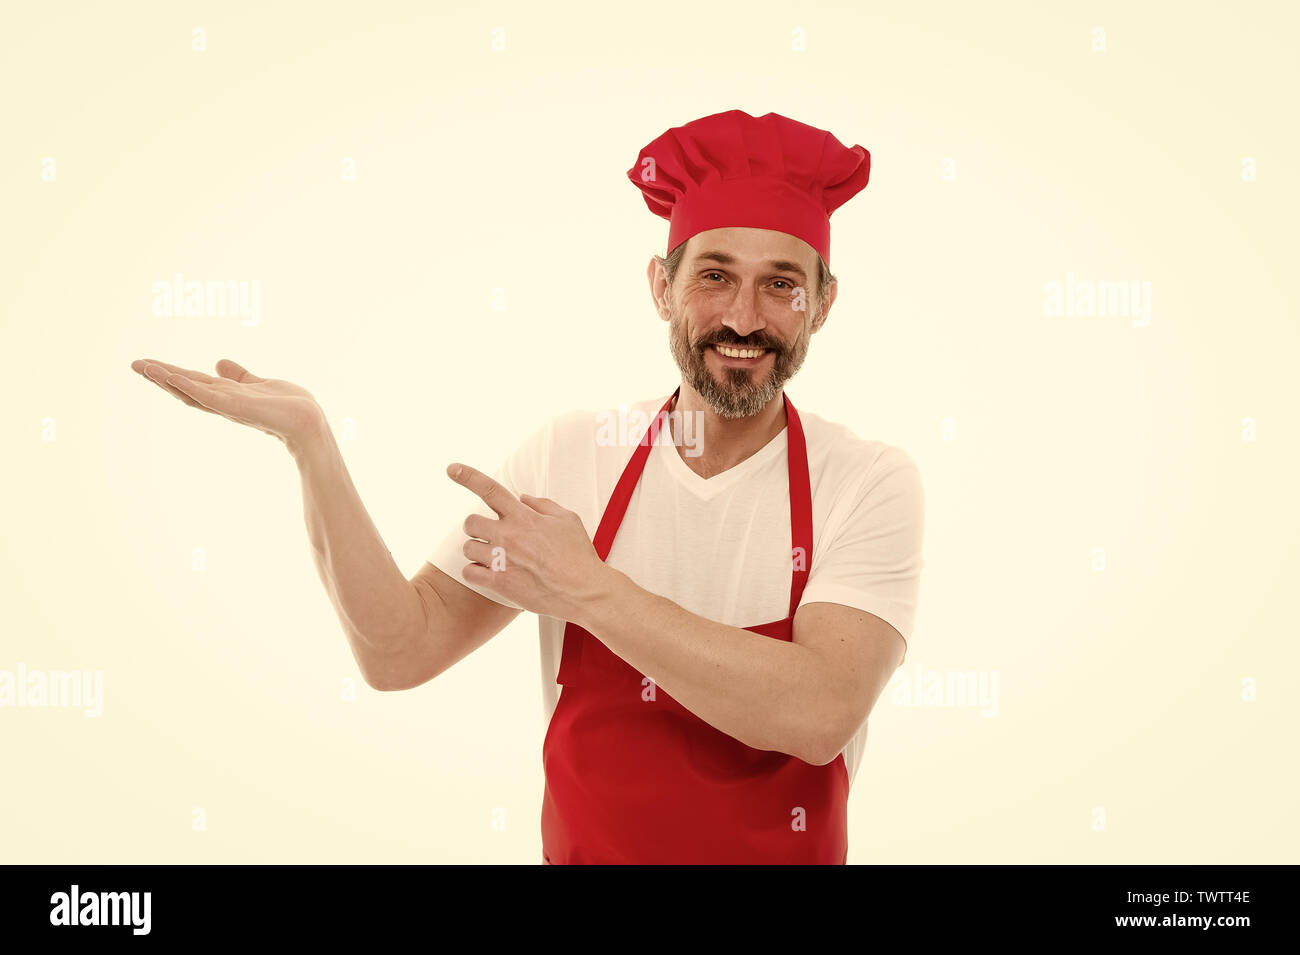 Pointing At Something Senior Cook With Beard And Moustache Wearing Bib Apron Bearded Mature 